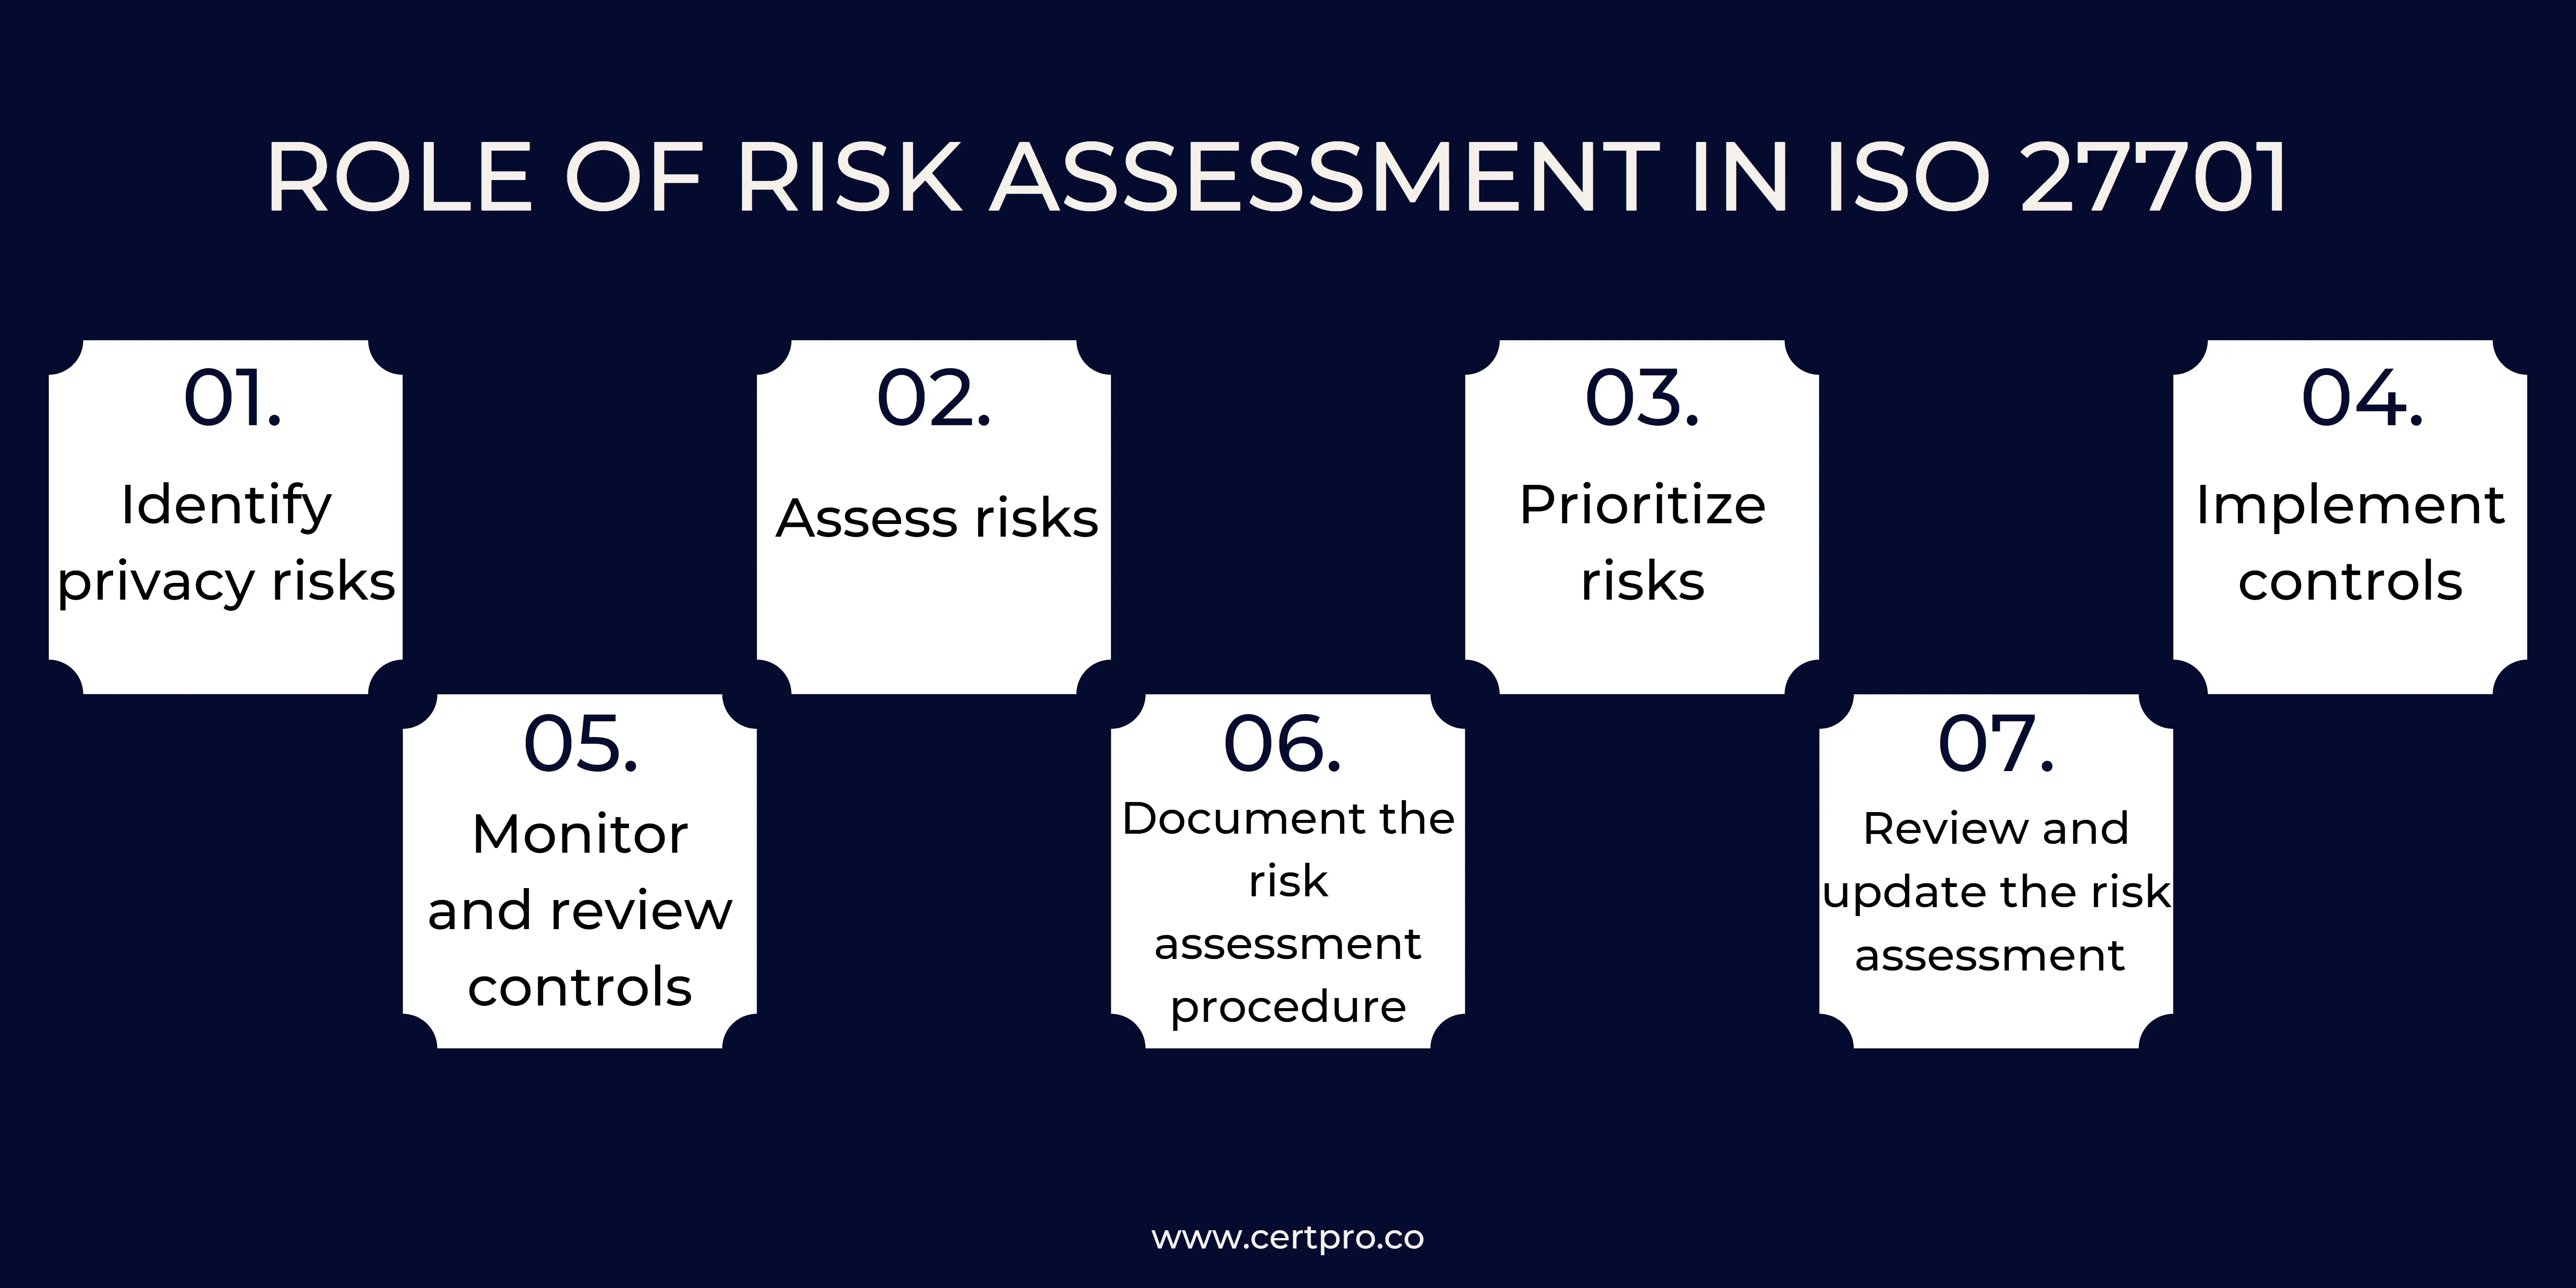 ROLE OF RISK ASSESSMENT